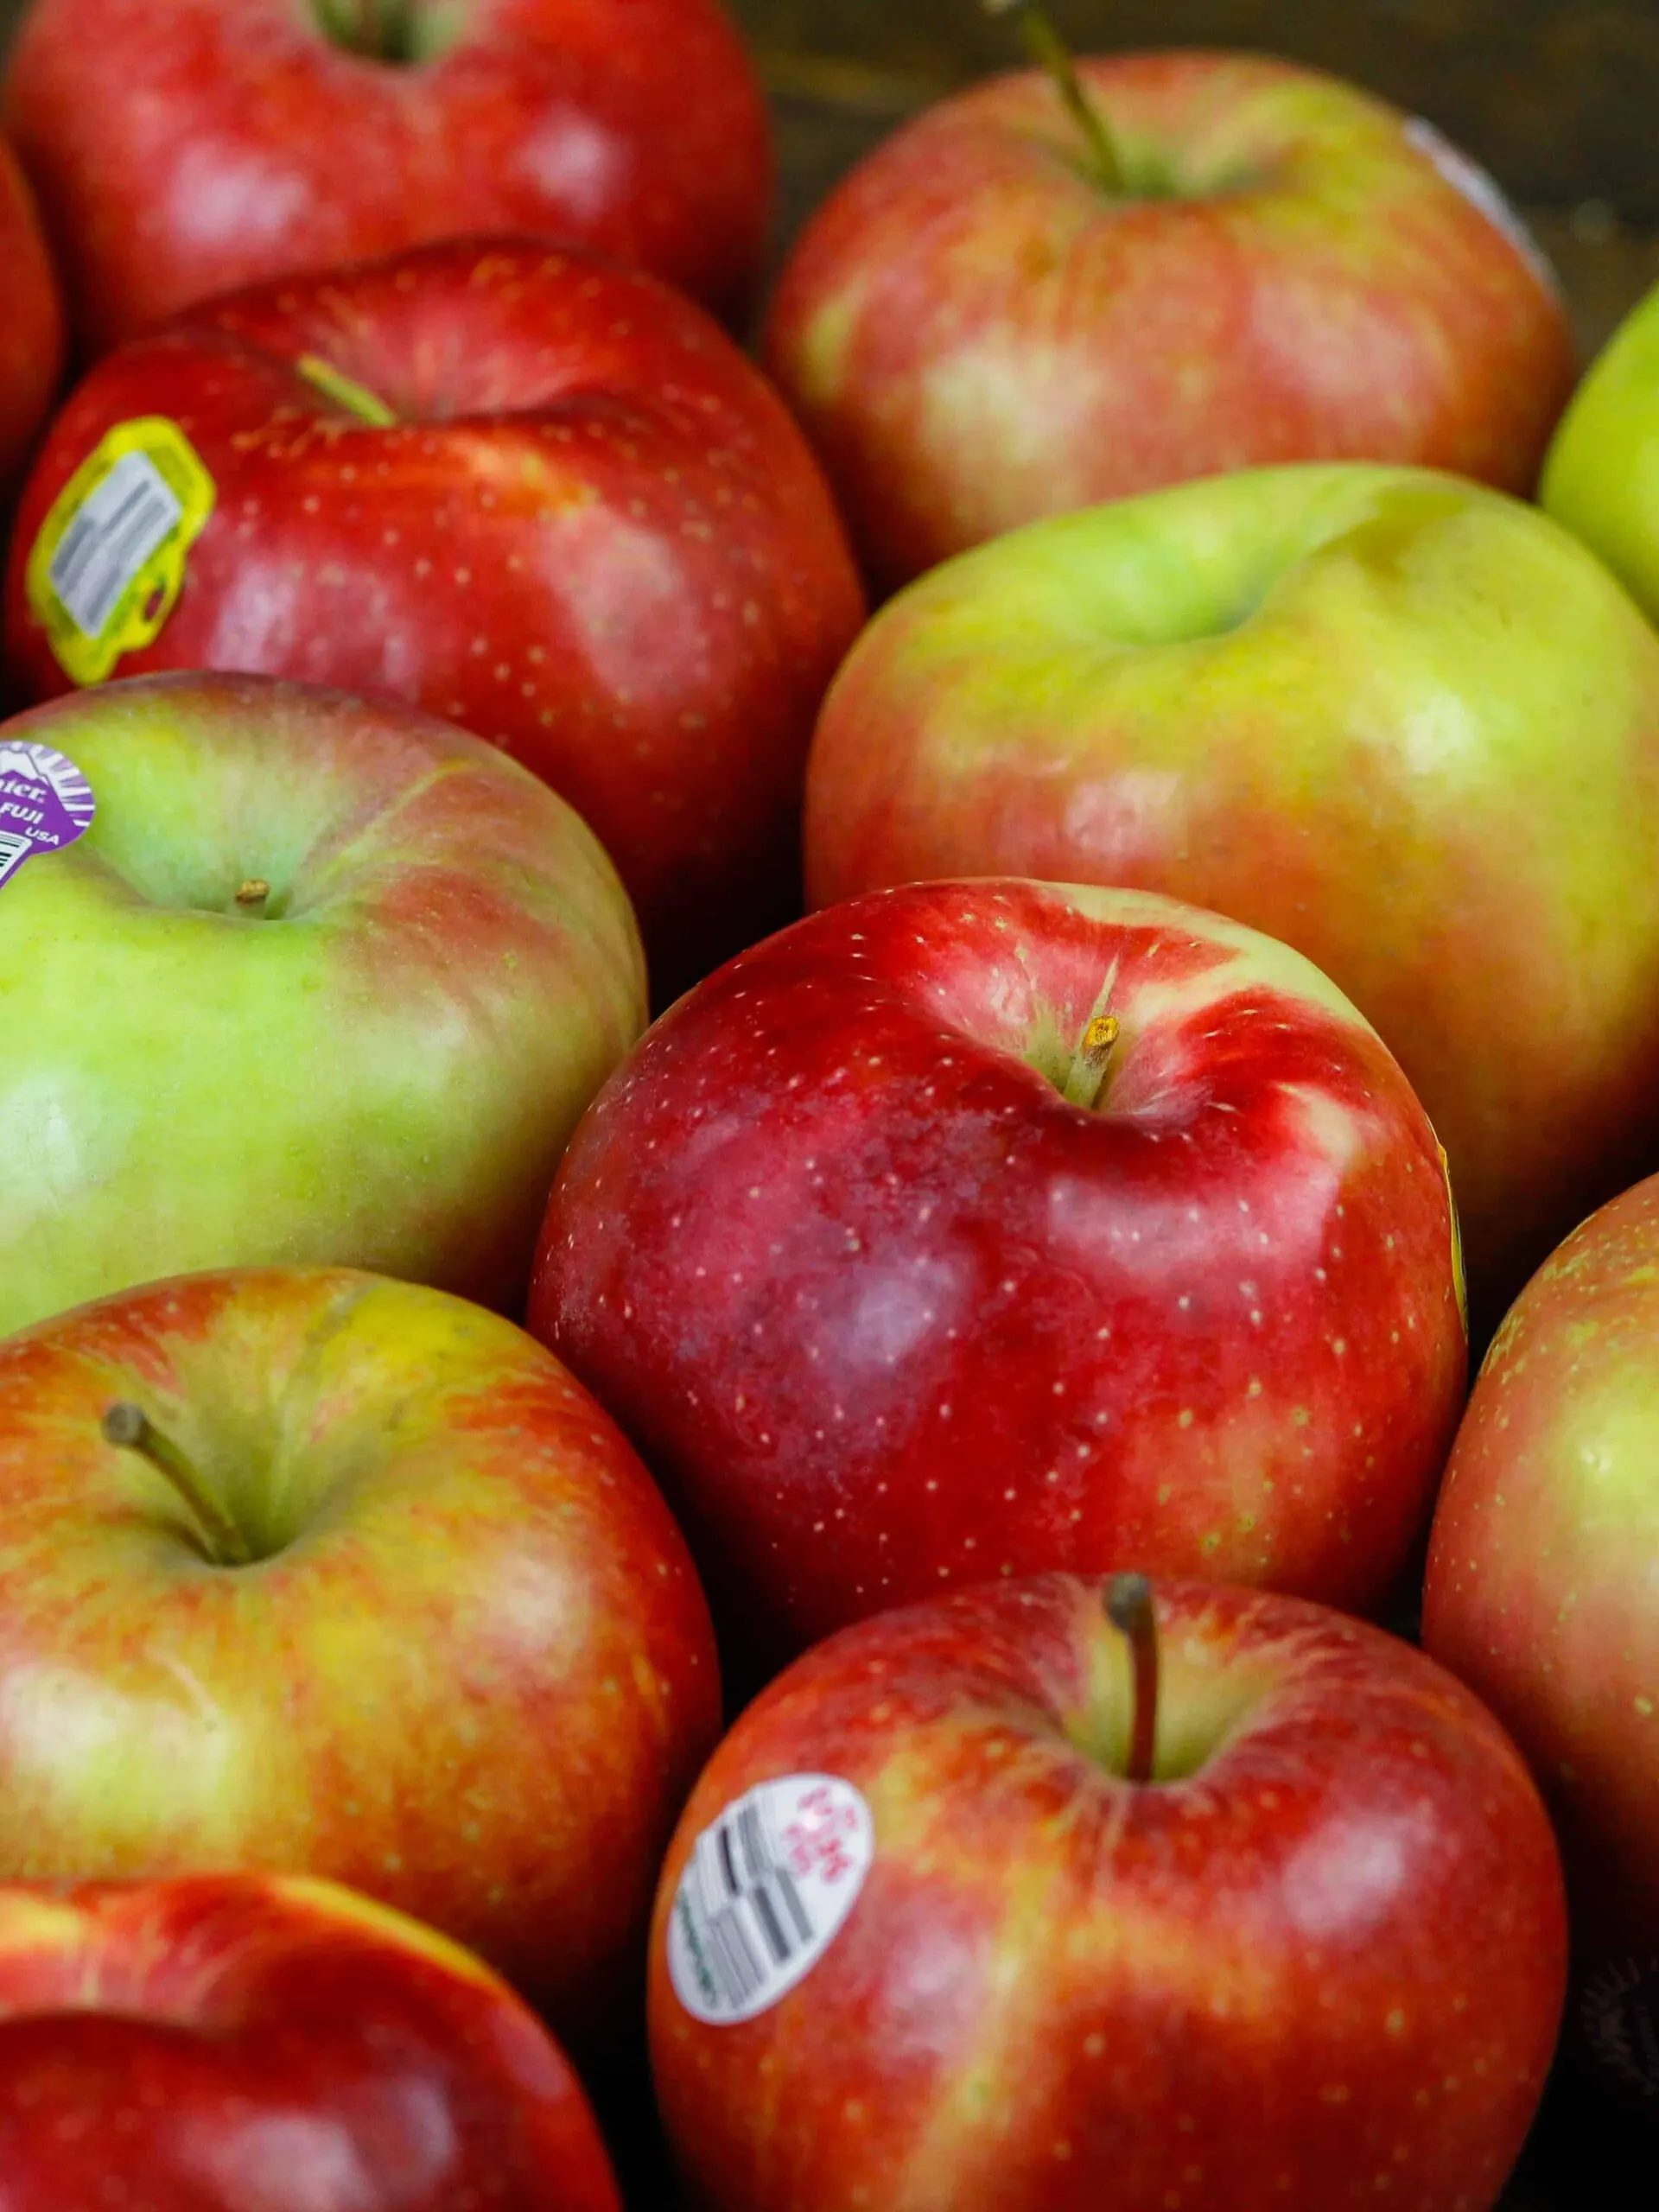 image of soft apple varieties ready to be used to make apple butter in an instant pot
